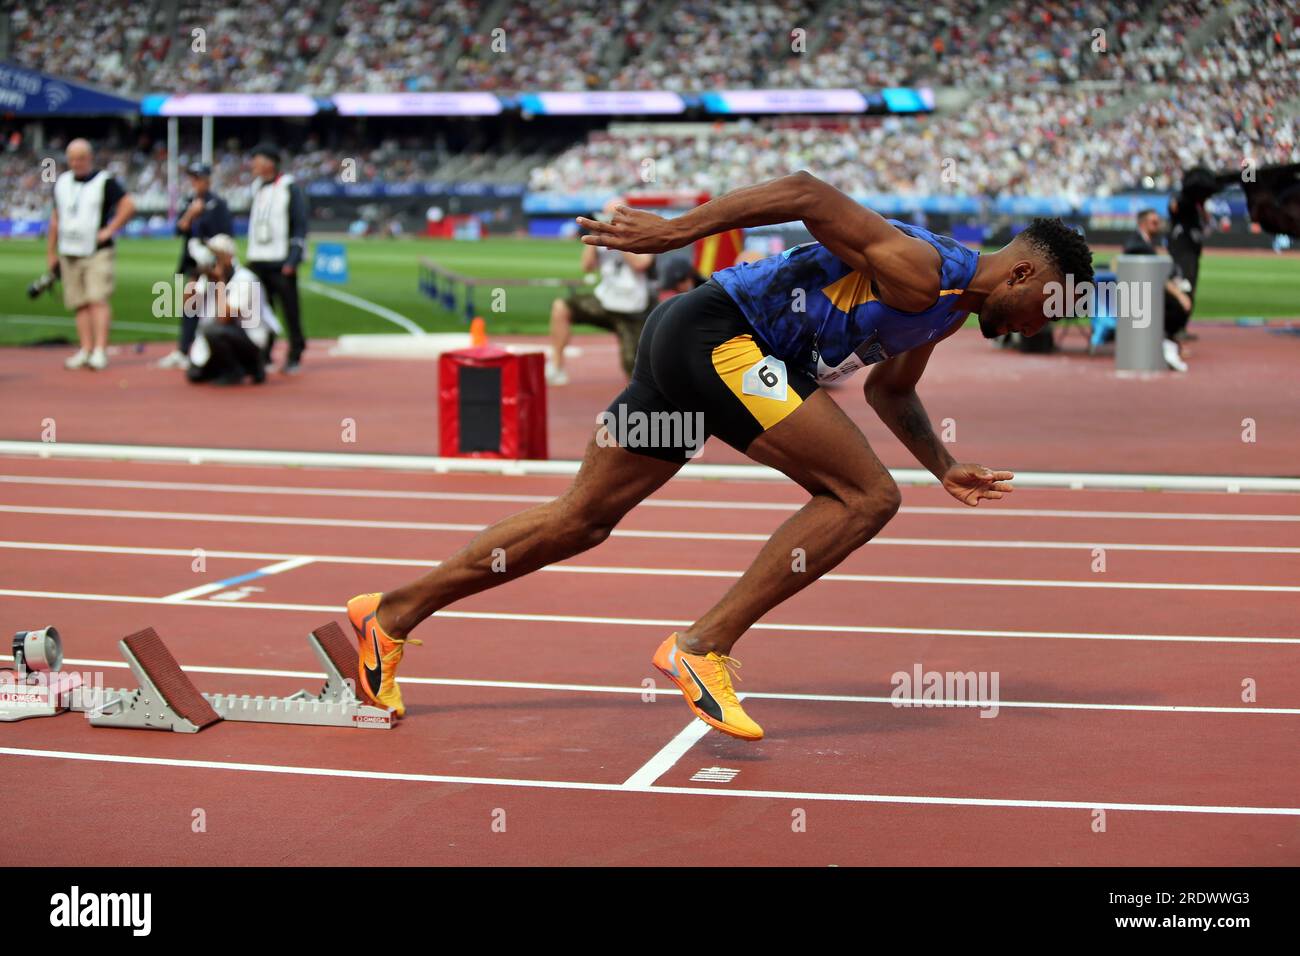 London, UK. 23rd July 23. Matthew HUDSON-SMITH (Great Britain) out of the starting blocks in the Men's 400m Final at the 2023, IAAF Diamond League, Queen Elizabeth Olympic Park, Stratford, London, UK. Credit: Simon Balson/Alamy Live News Stock Photo